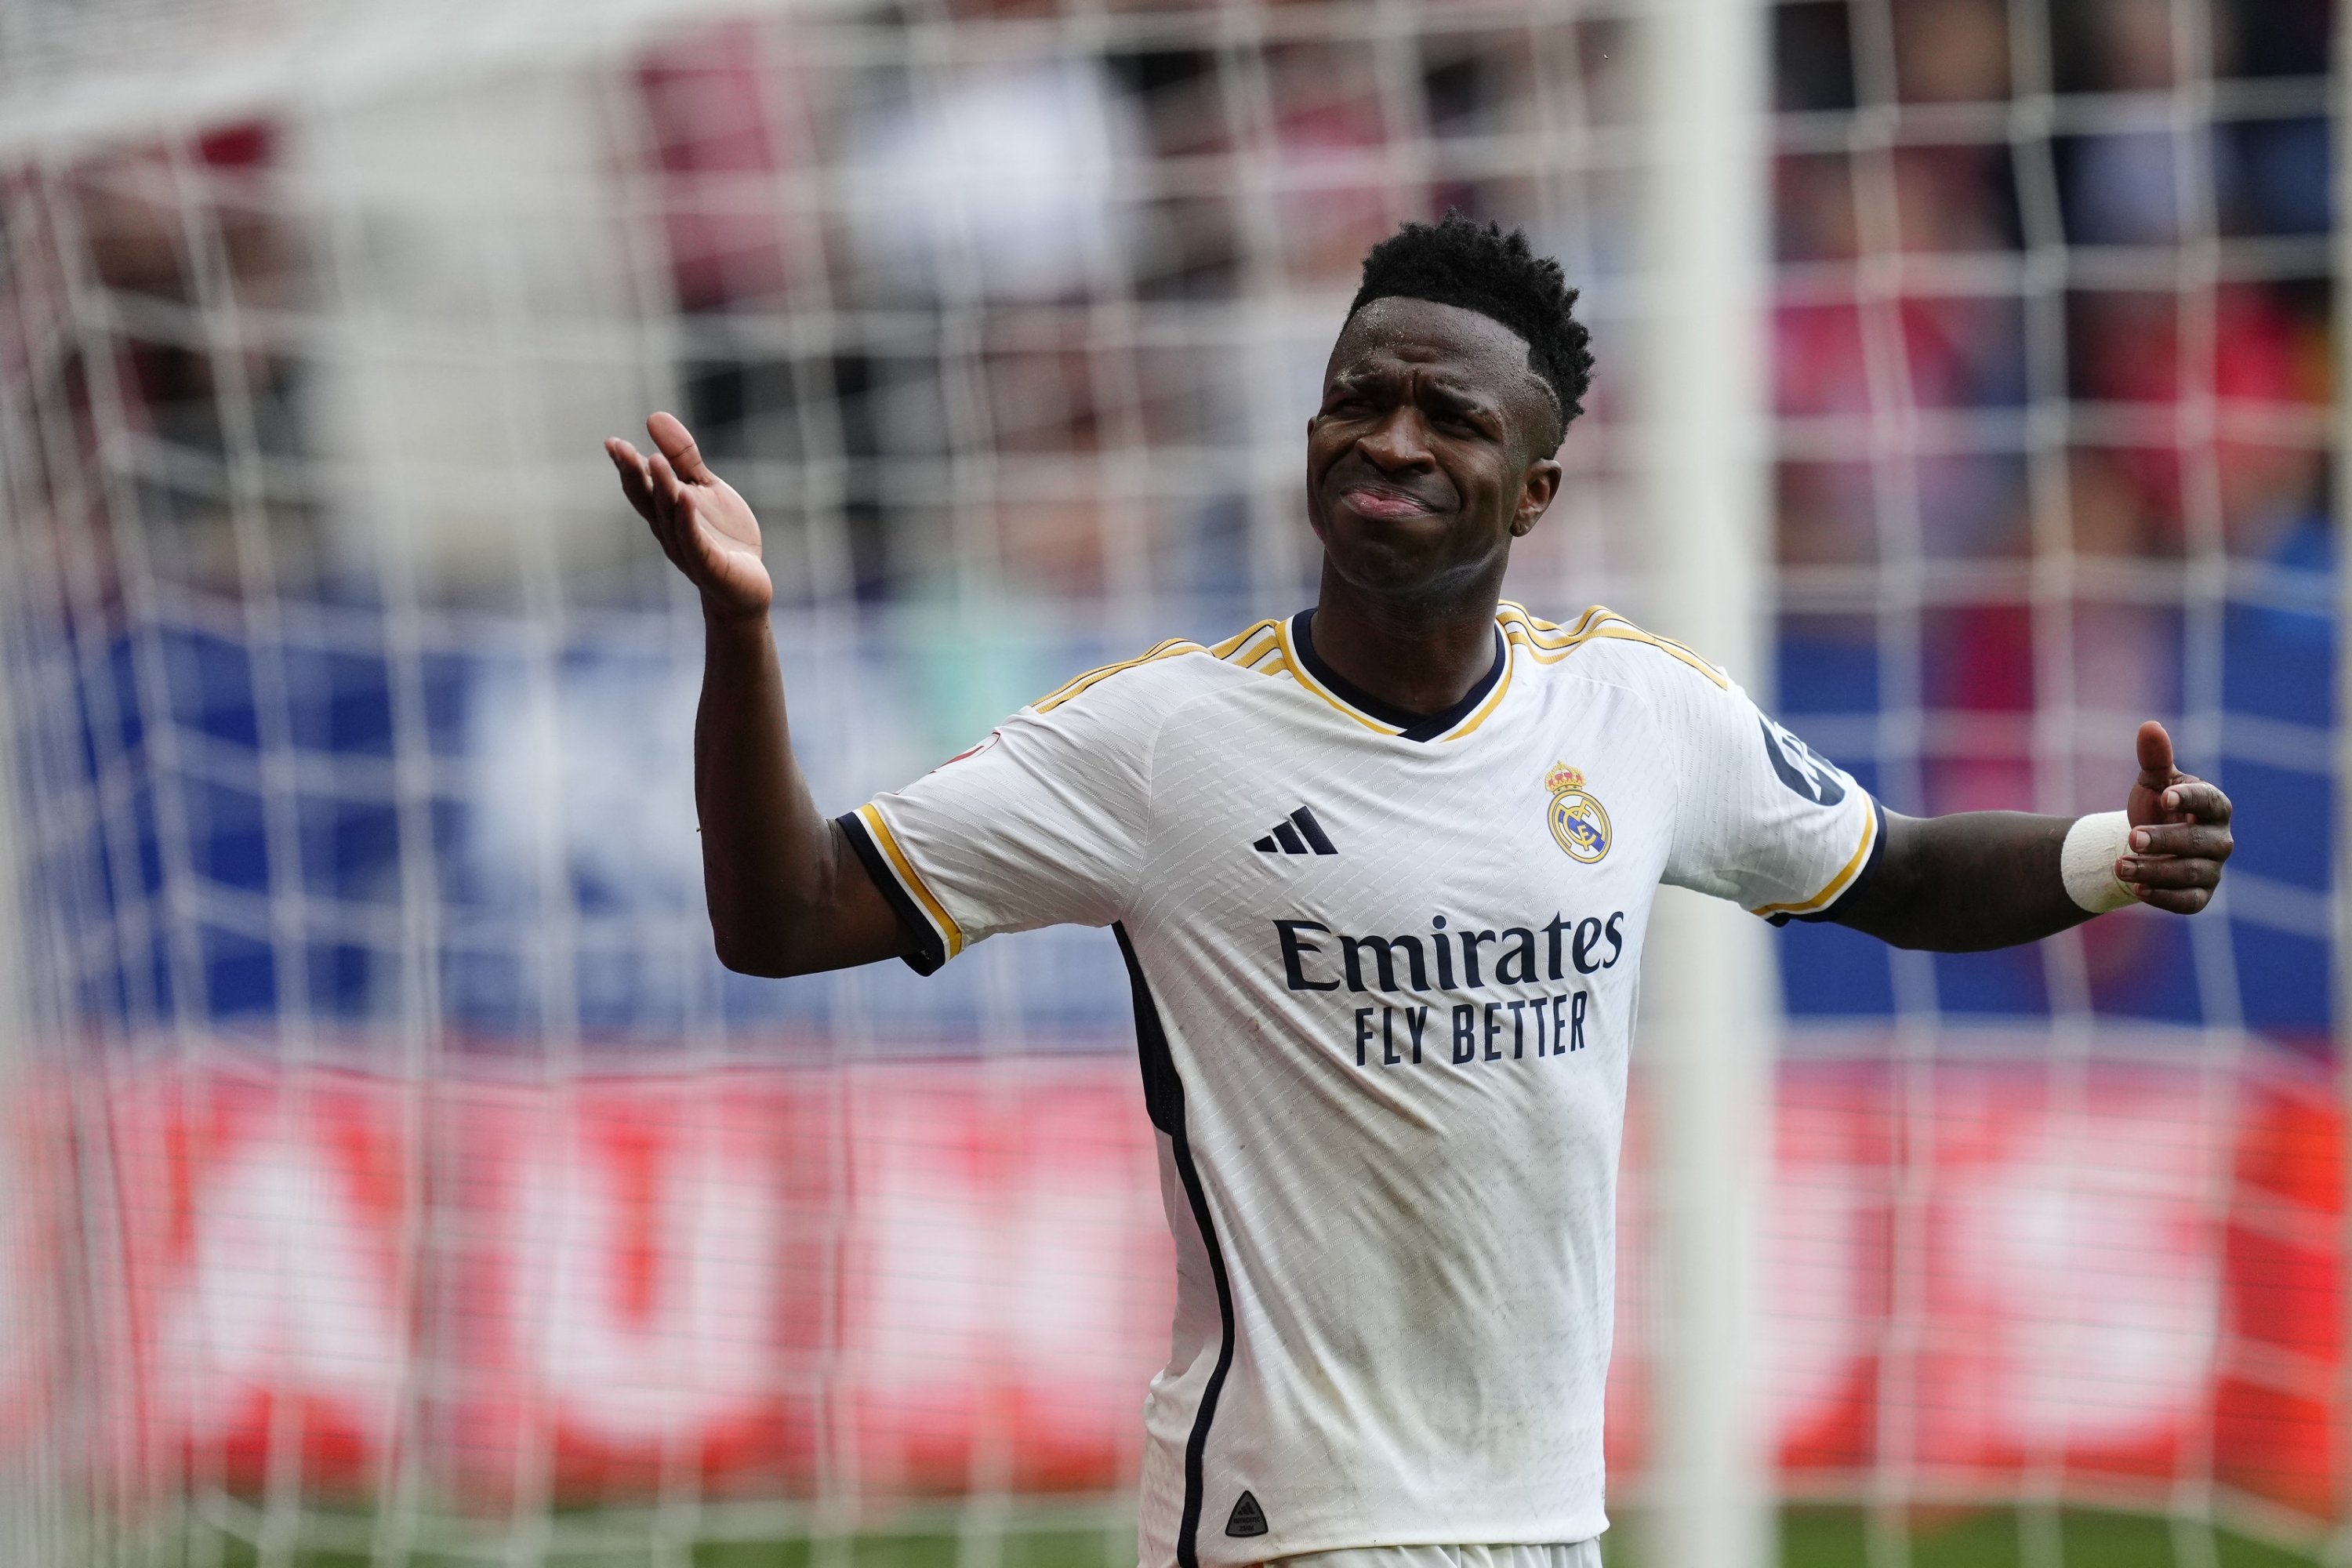 Real Madrid file complaint after racist insults towards Vinicius Jr